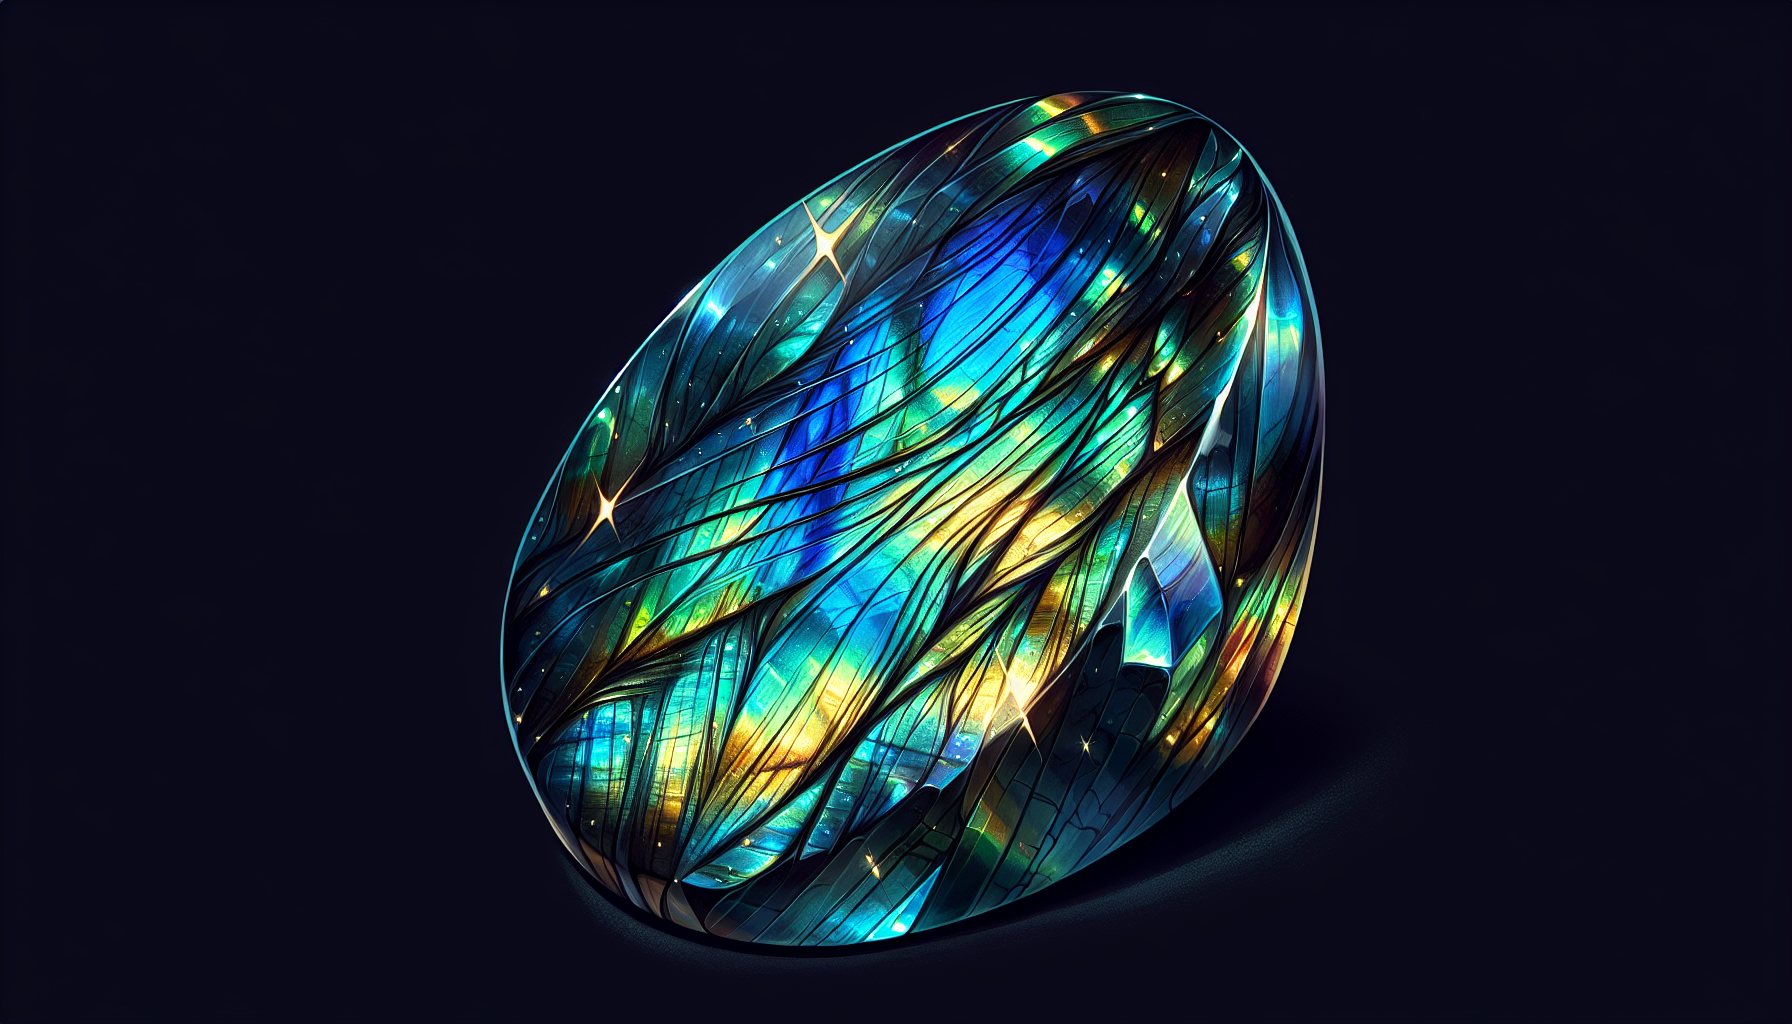 Illustration of a mesmerizing labradorite stone with vibrant colors